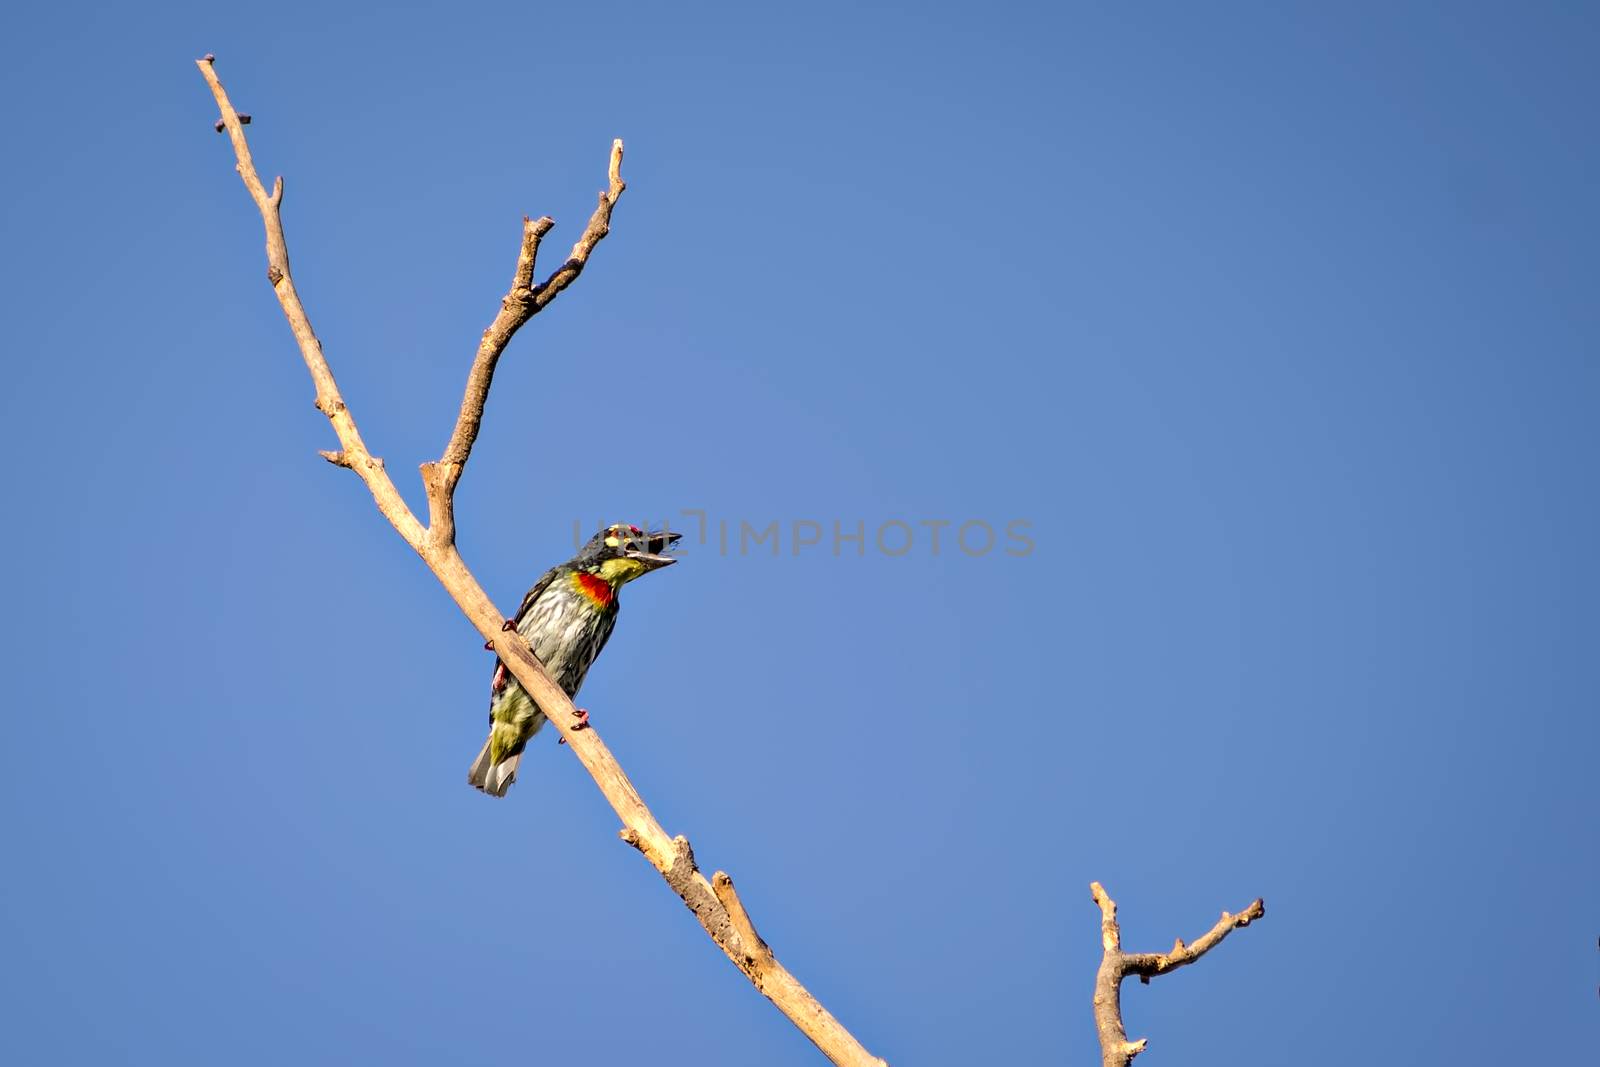 Isolated image of shouting copper smith barbet bird, sitting on a dry tree branch with clear blue sky background..